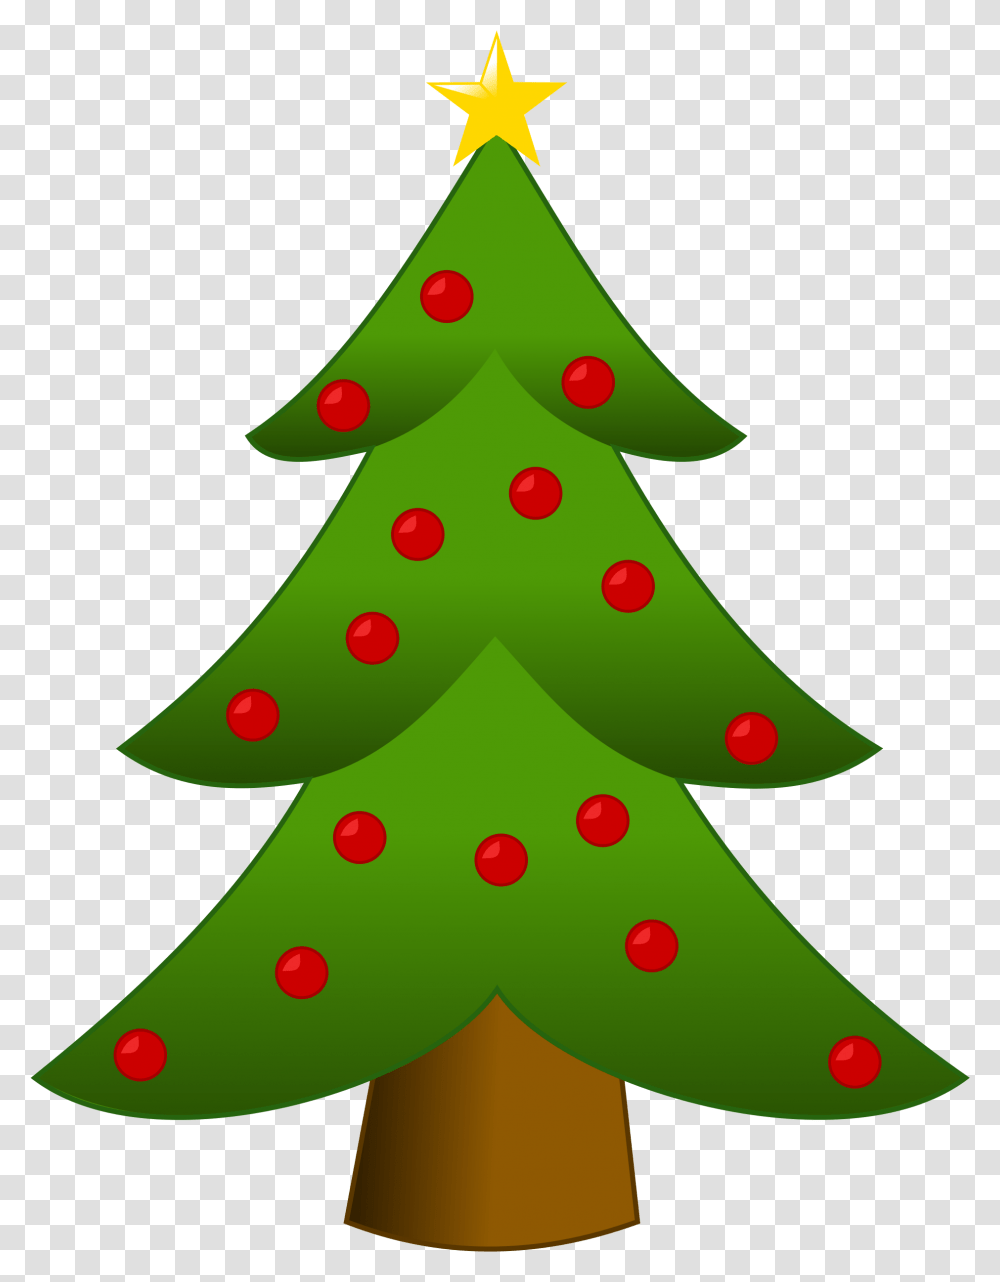 Christmas Tree Clipart 25 Clipart Simple Christmas Tree, Plant, Ornament, Star Symbol Transparent Png